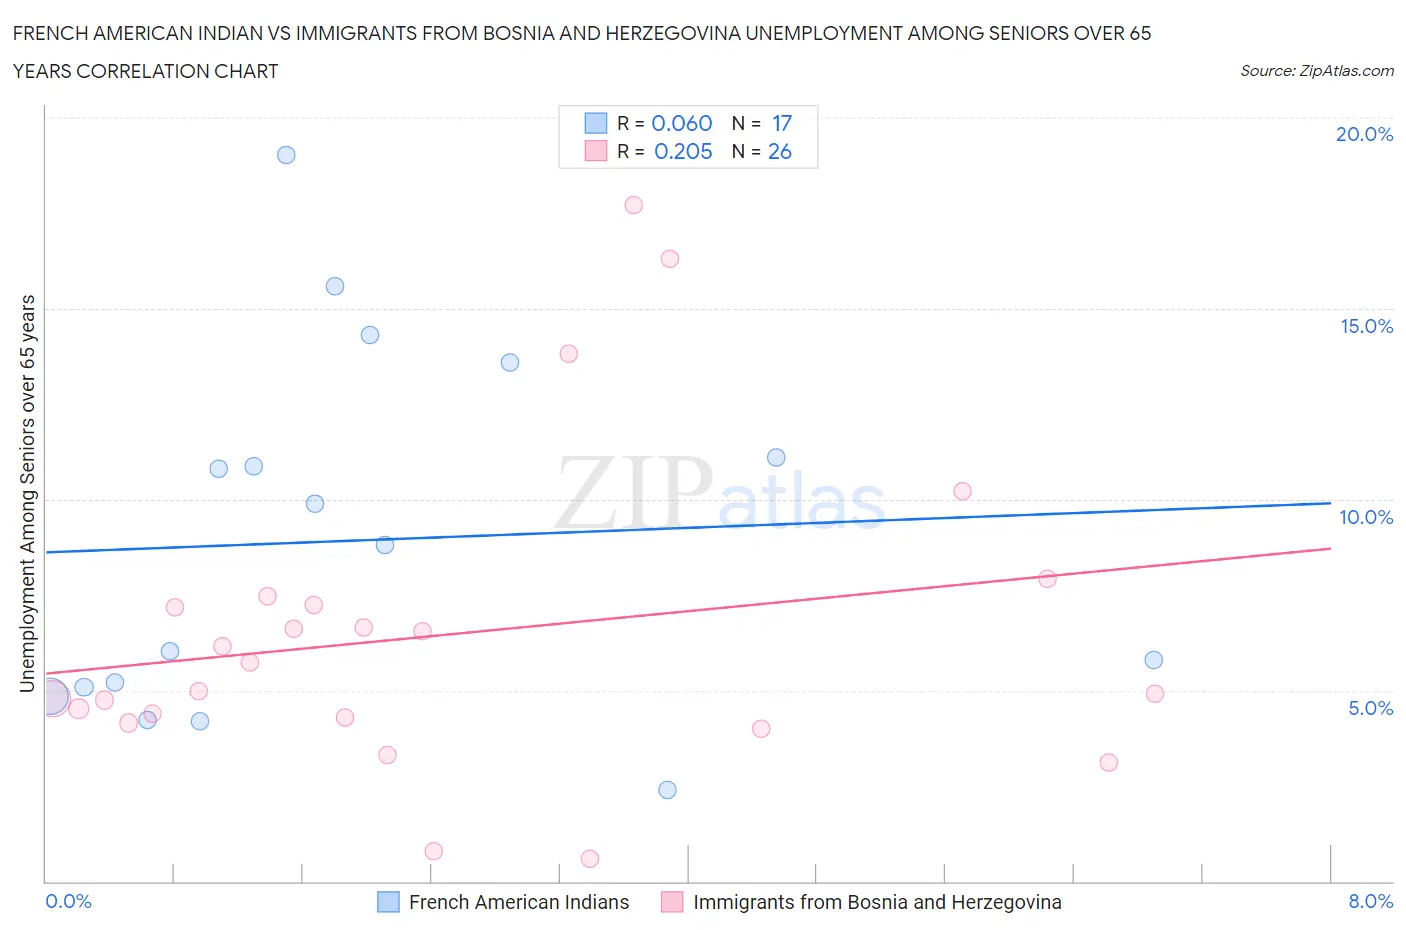 French American Indian vs Immigrants from Bosnia and Herzegovina Unemployment Among Seniors over 65 years